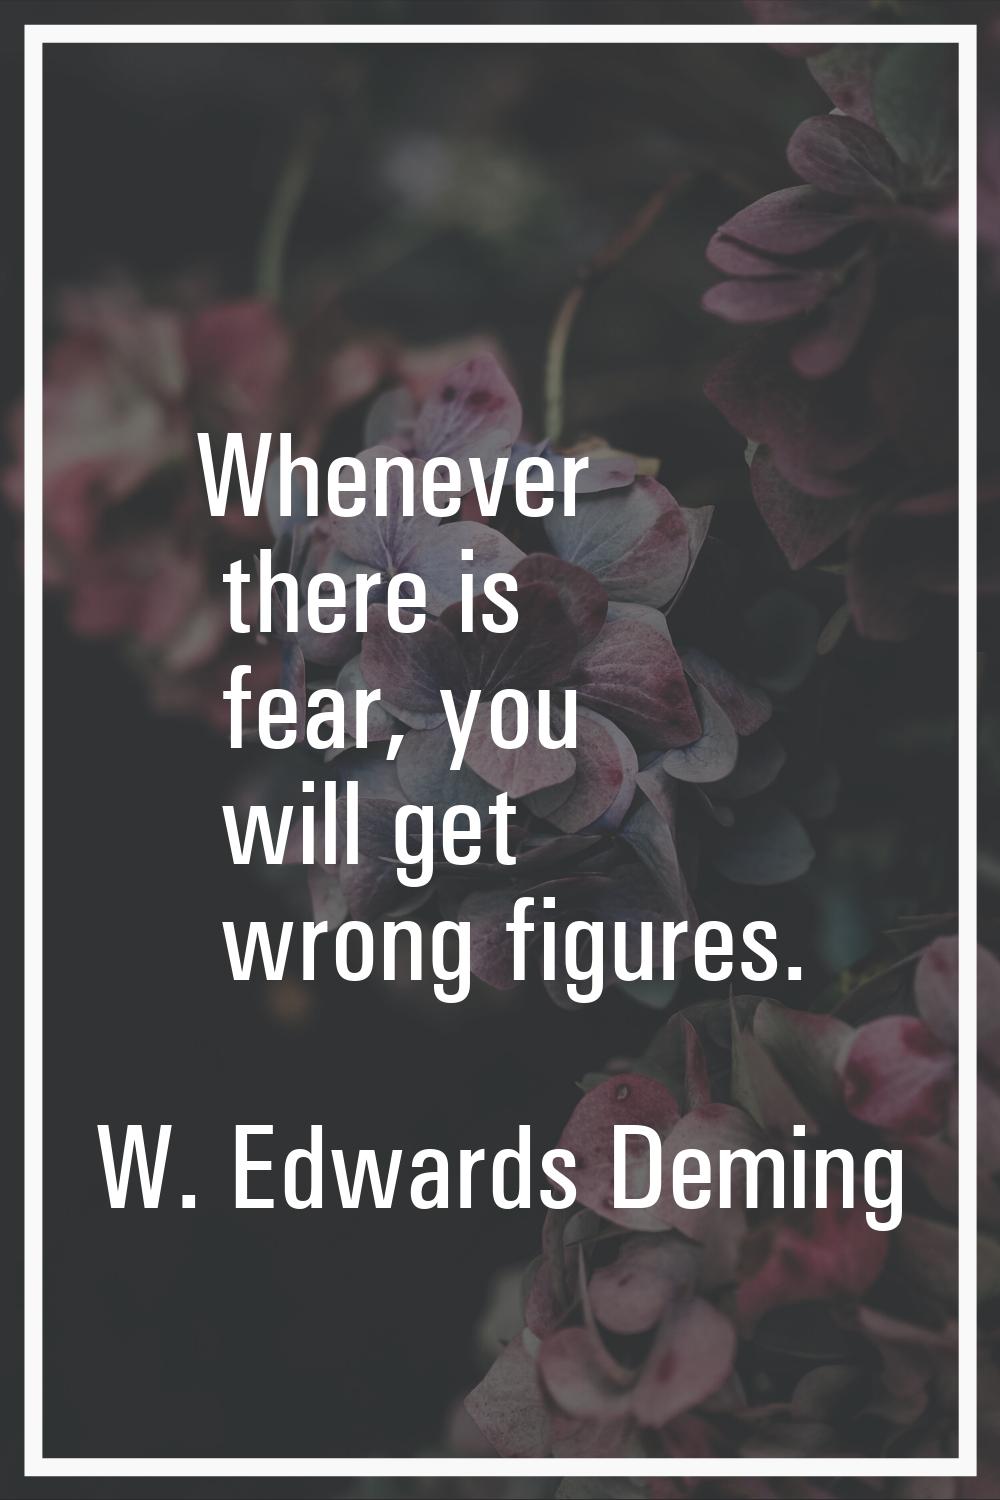 Whenever there is fear, you will get wrong figures.